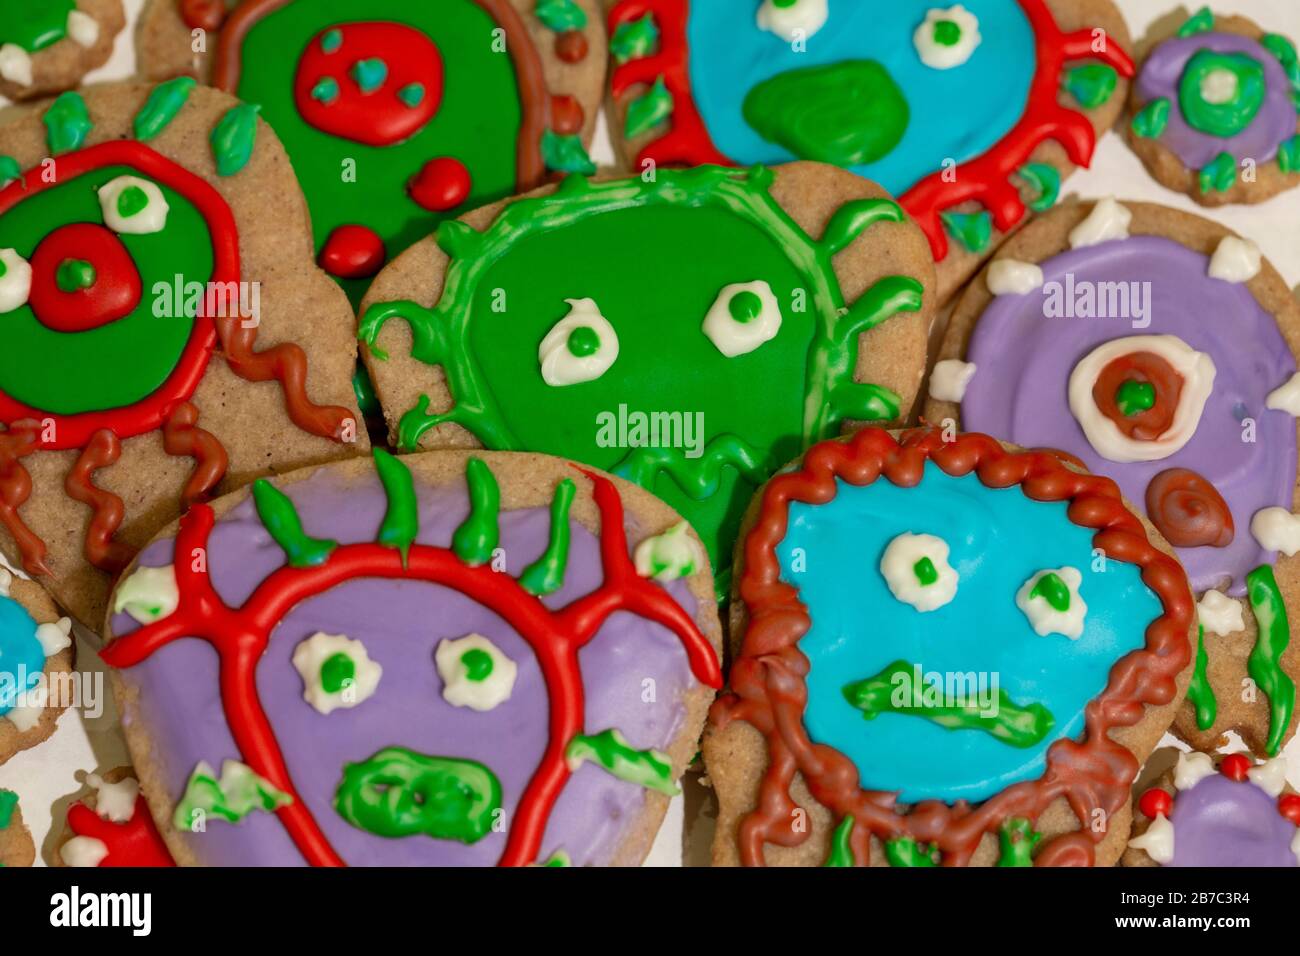 Cookies frosted with red, green, purple and blue, decorated like germs, bacteria, or viruses. Stock Photo